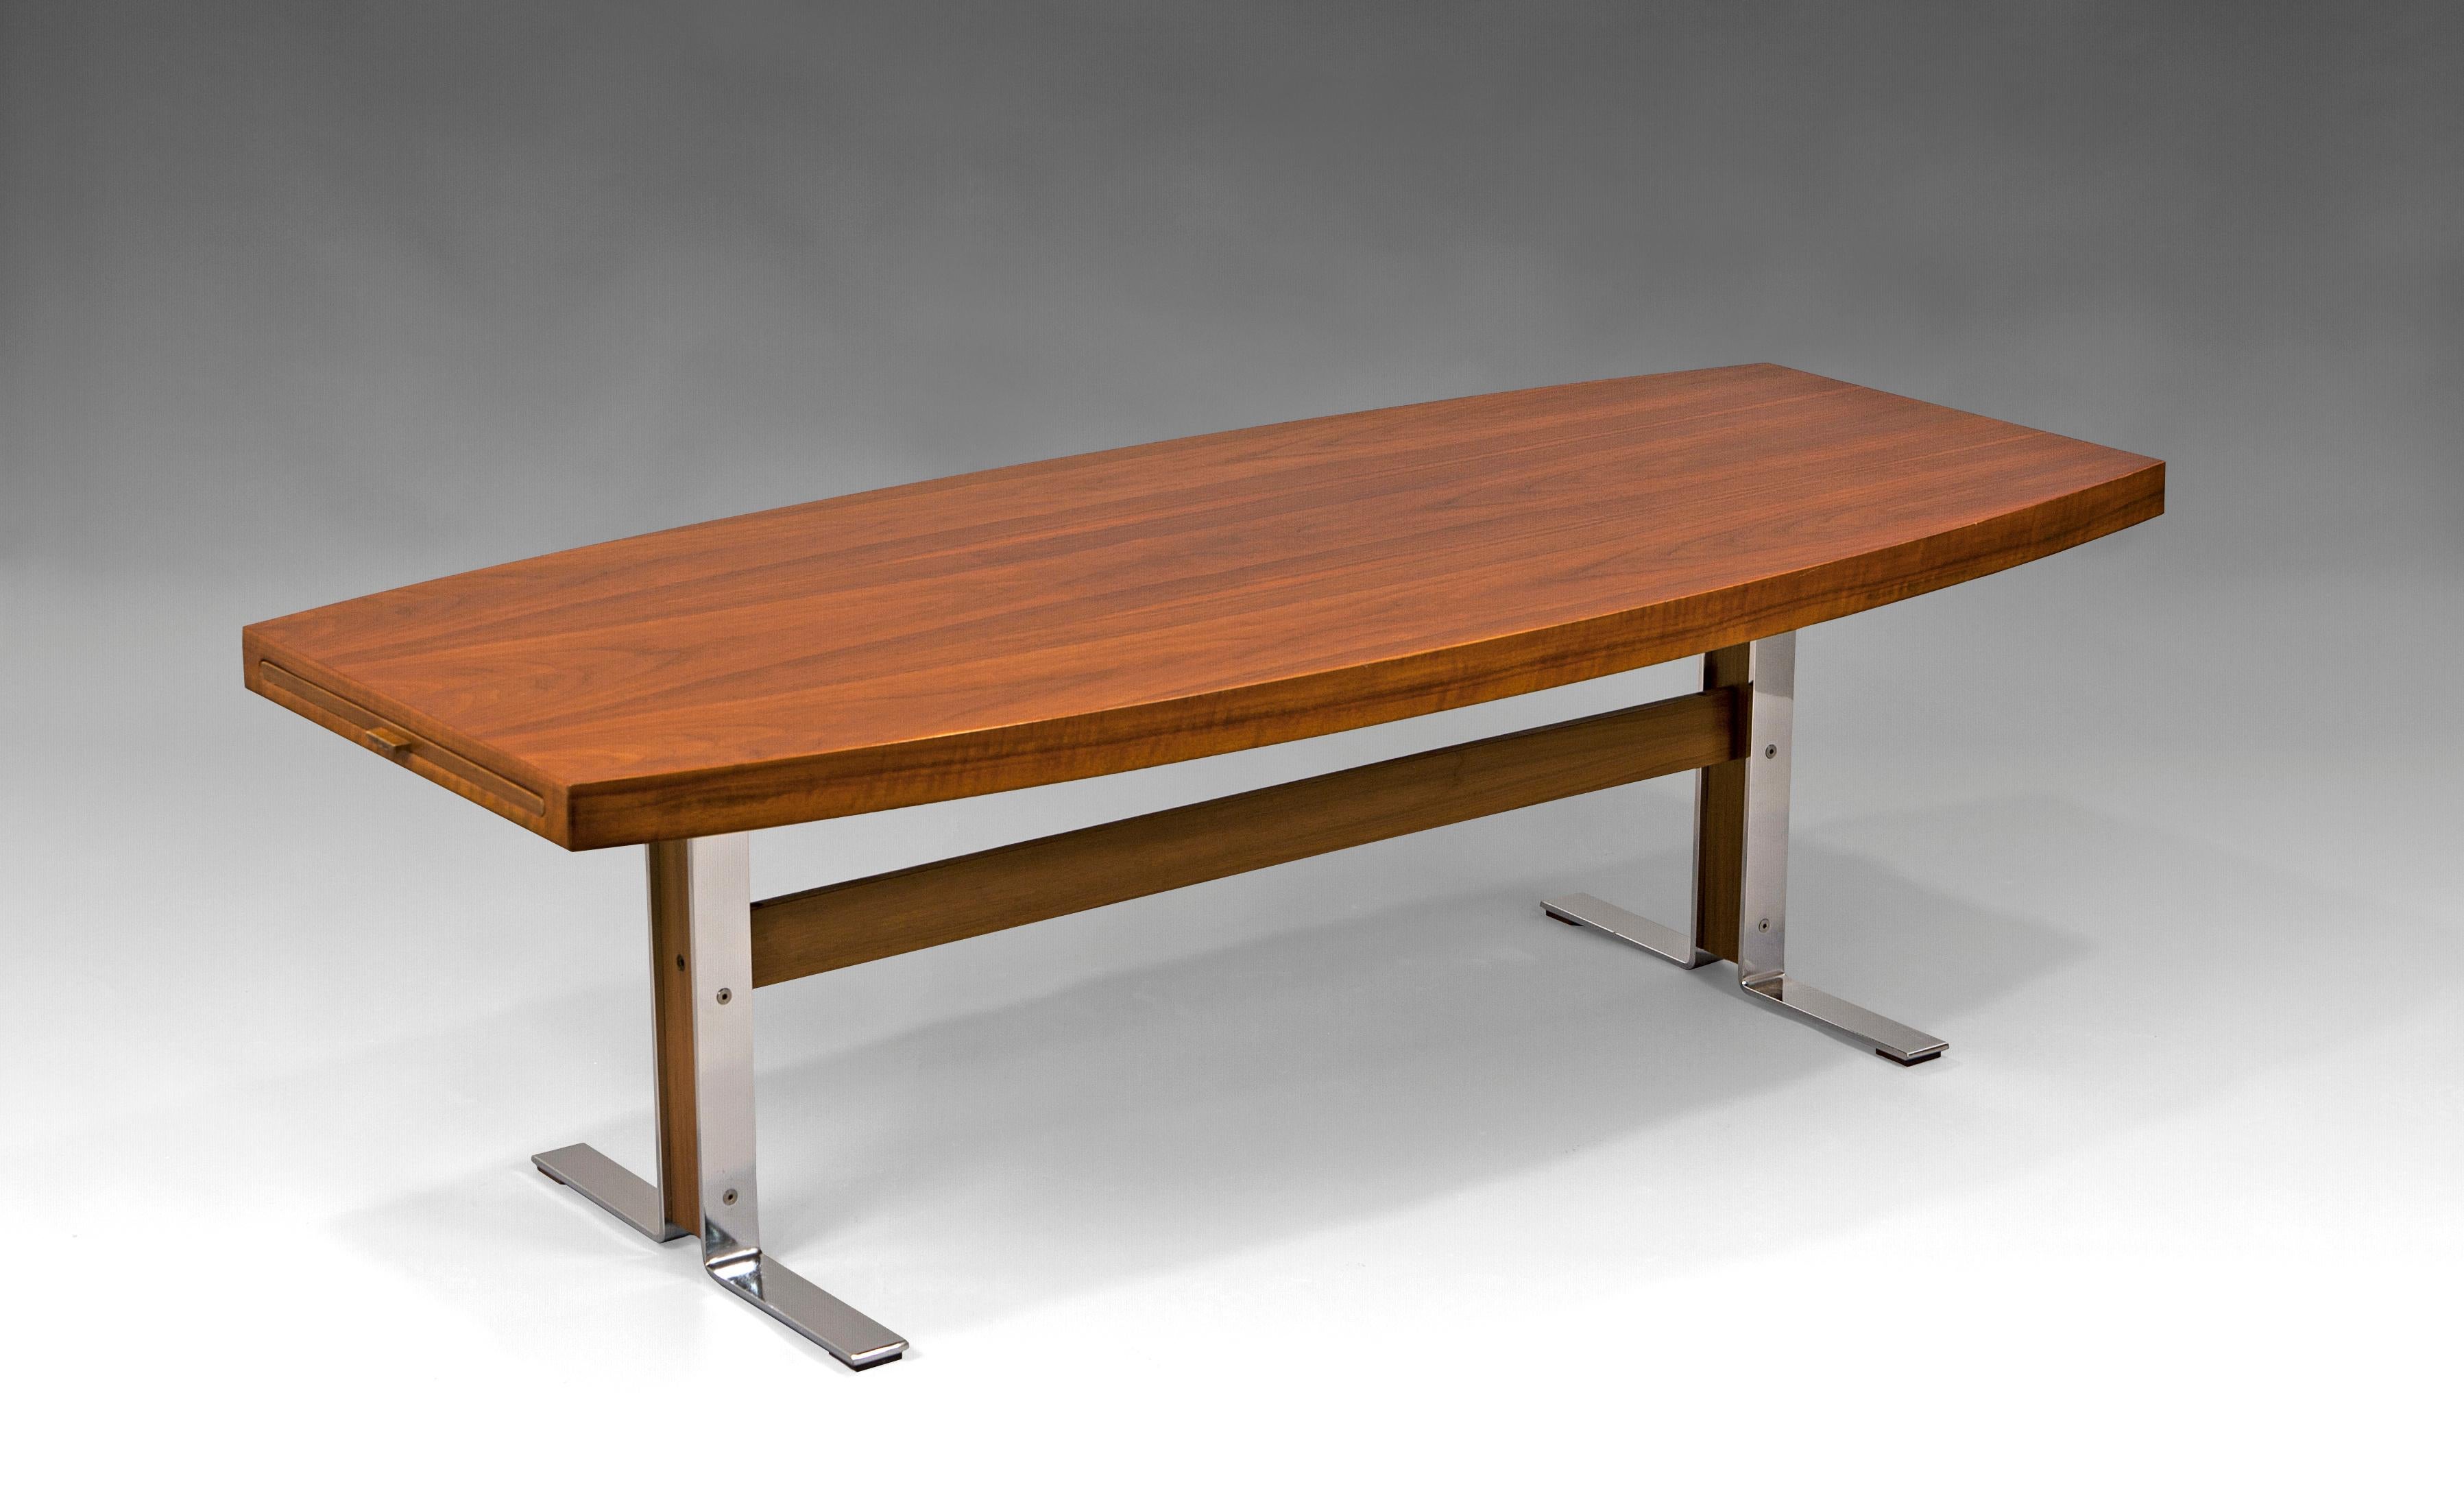 Coffee table designed by Johannes Andersen for Tresum. Sweden, 1960s. Teak wood with formica laminate and metallic details. 
Excellent condition fully restored.
 